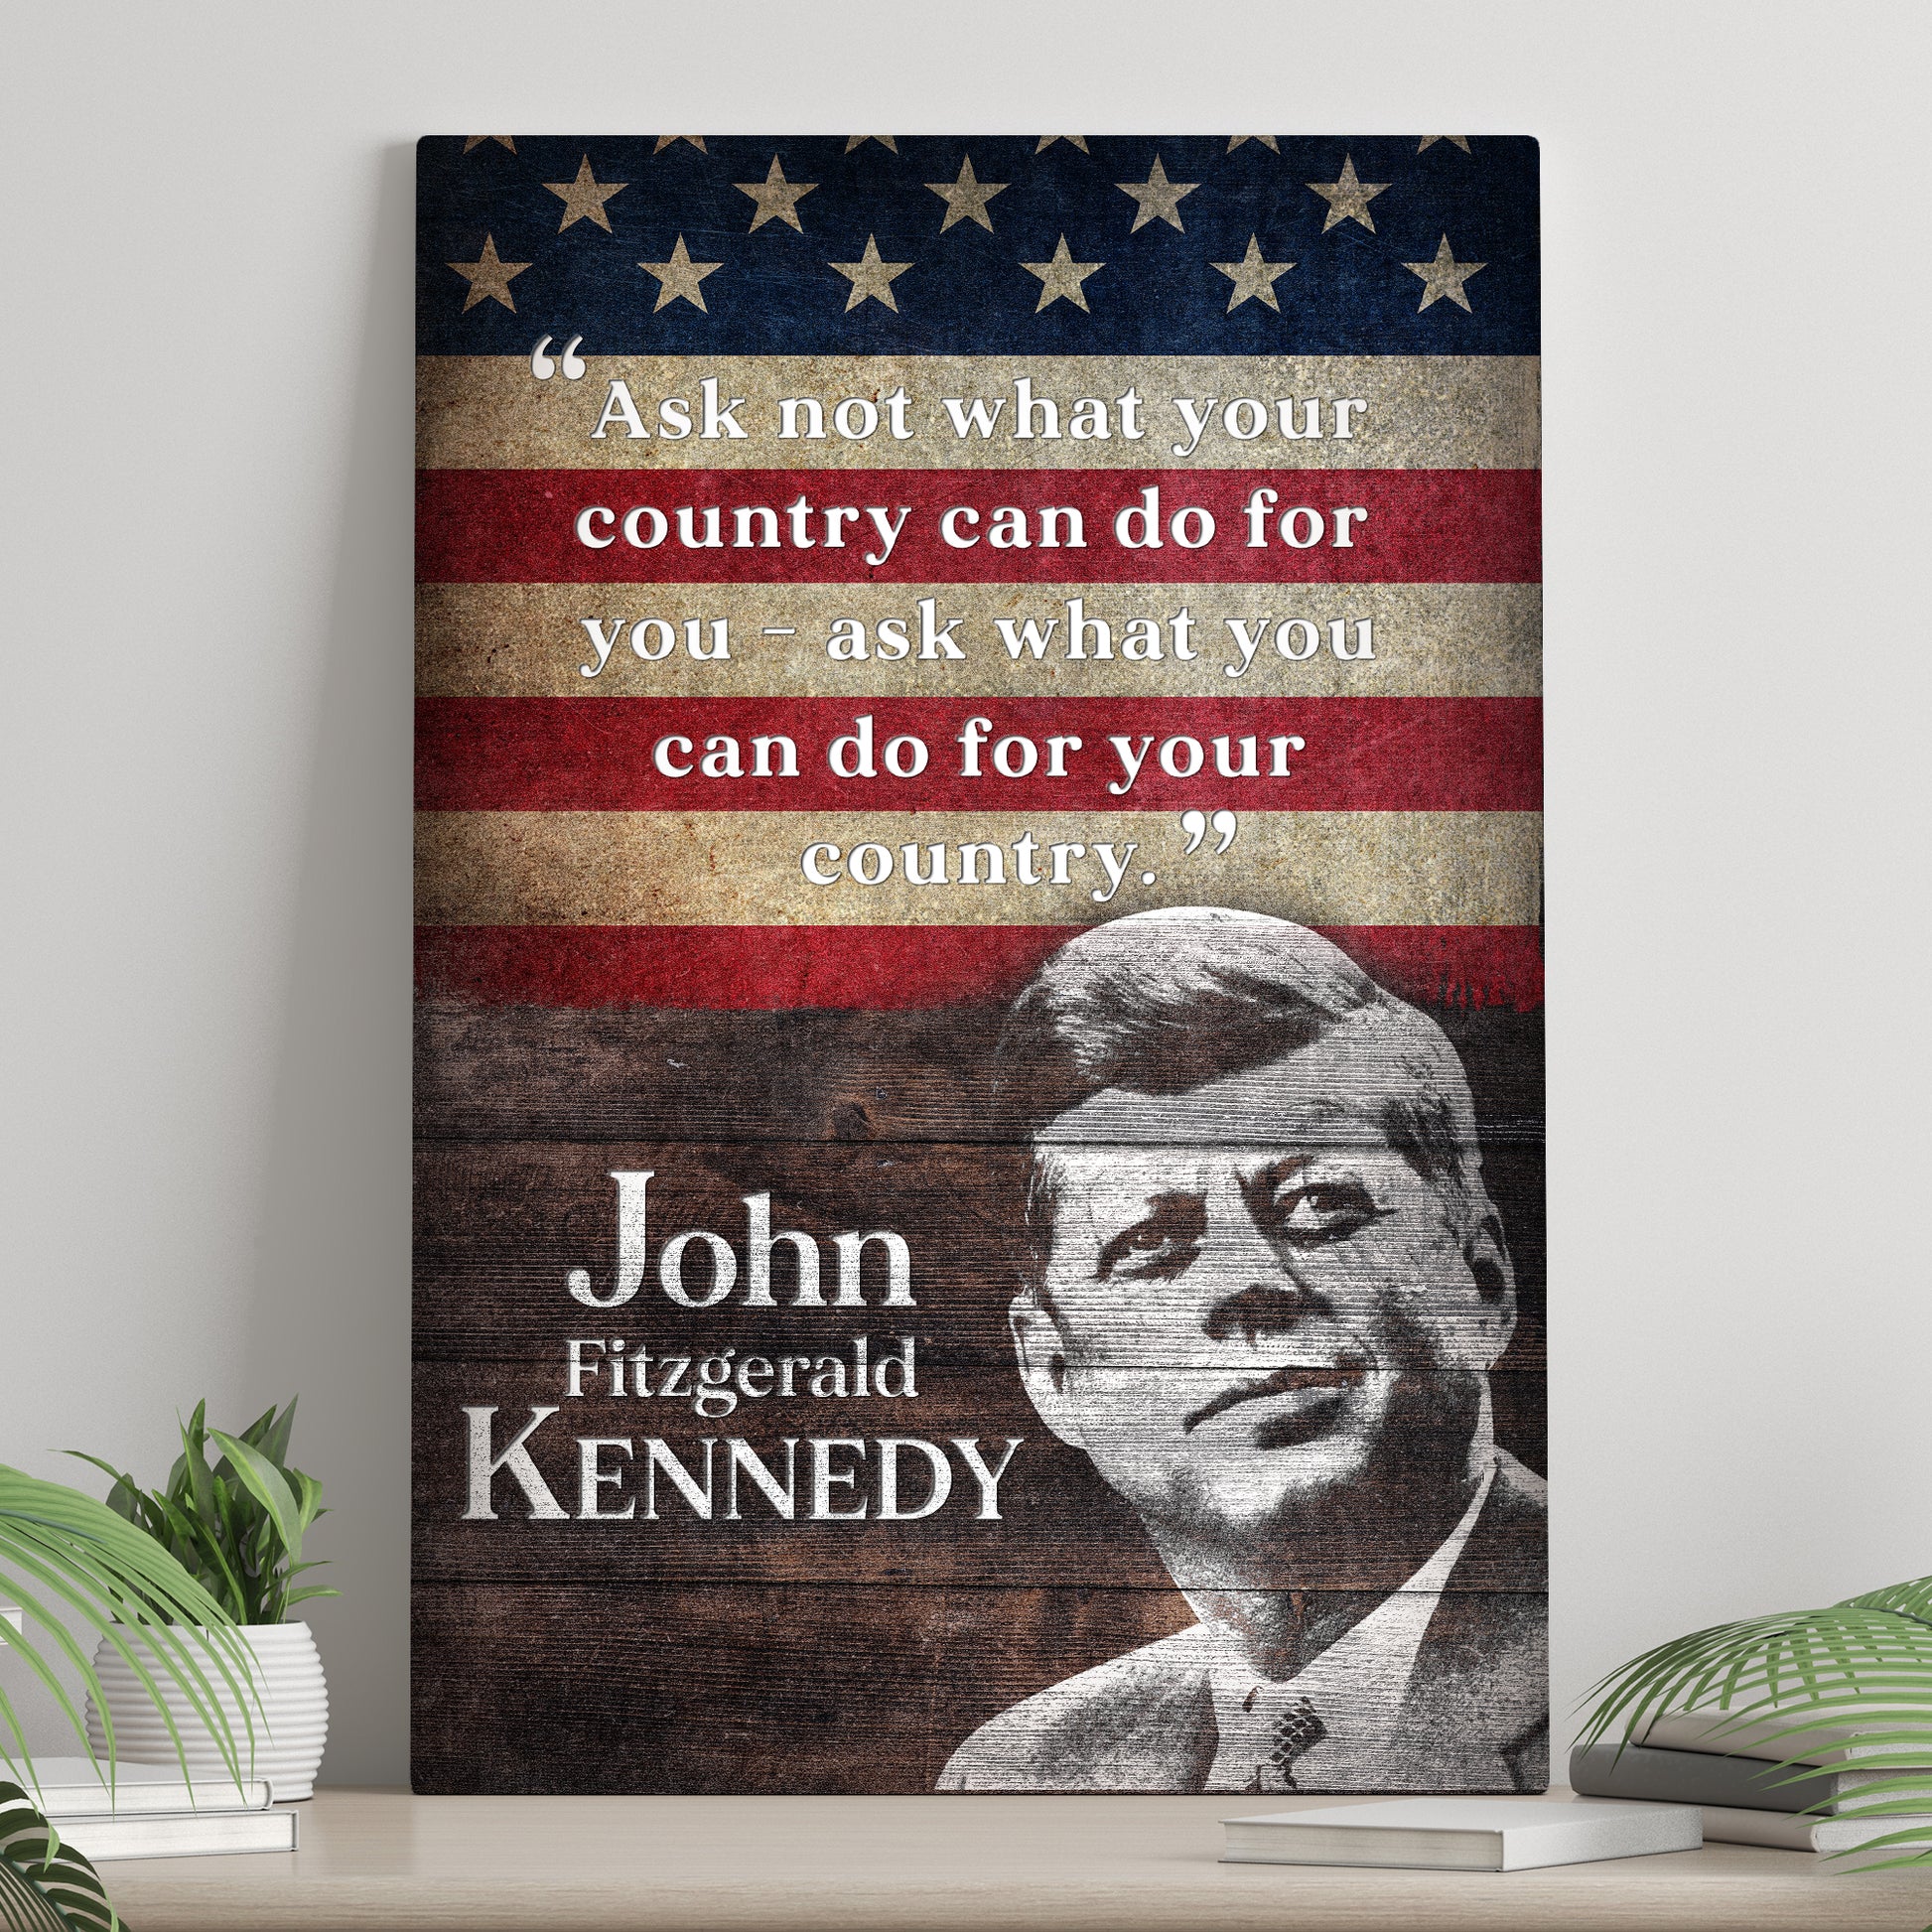 John F. Kennedy Inaugural Address Sign  - Image by Tailored Canvases